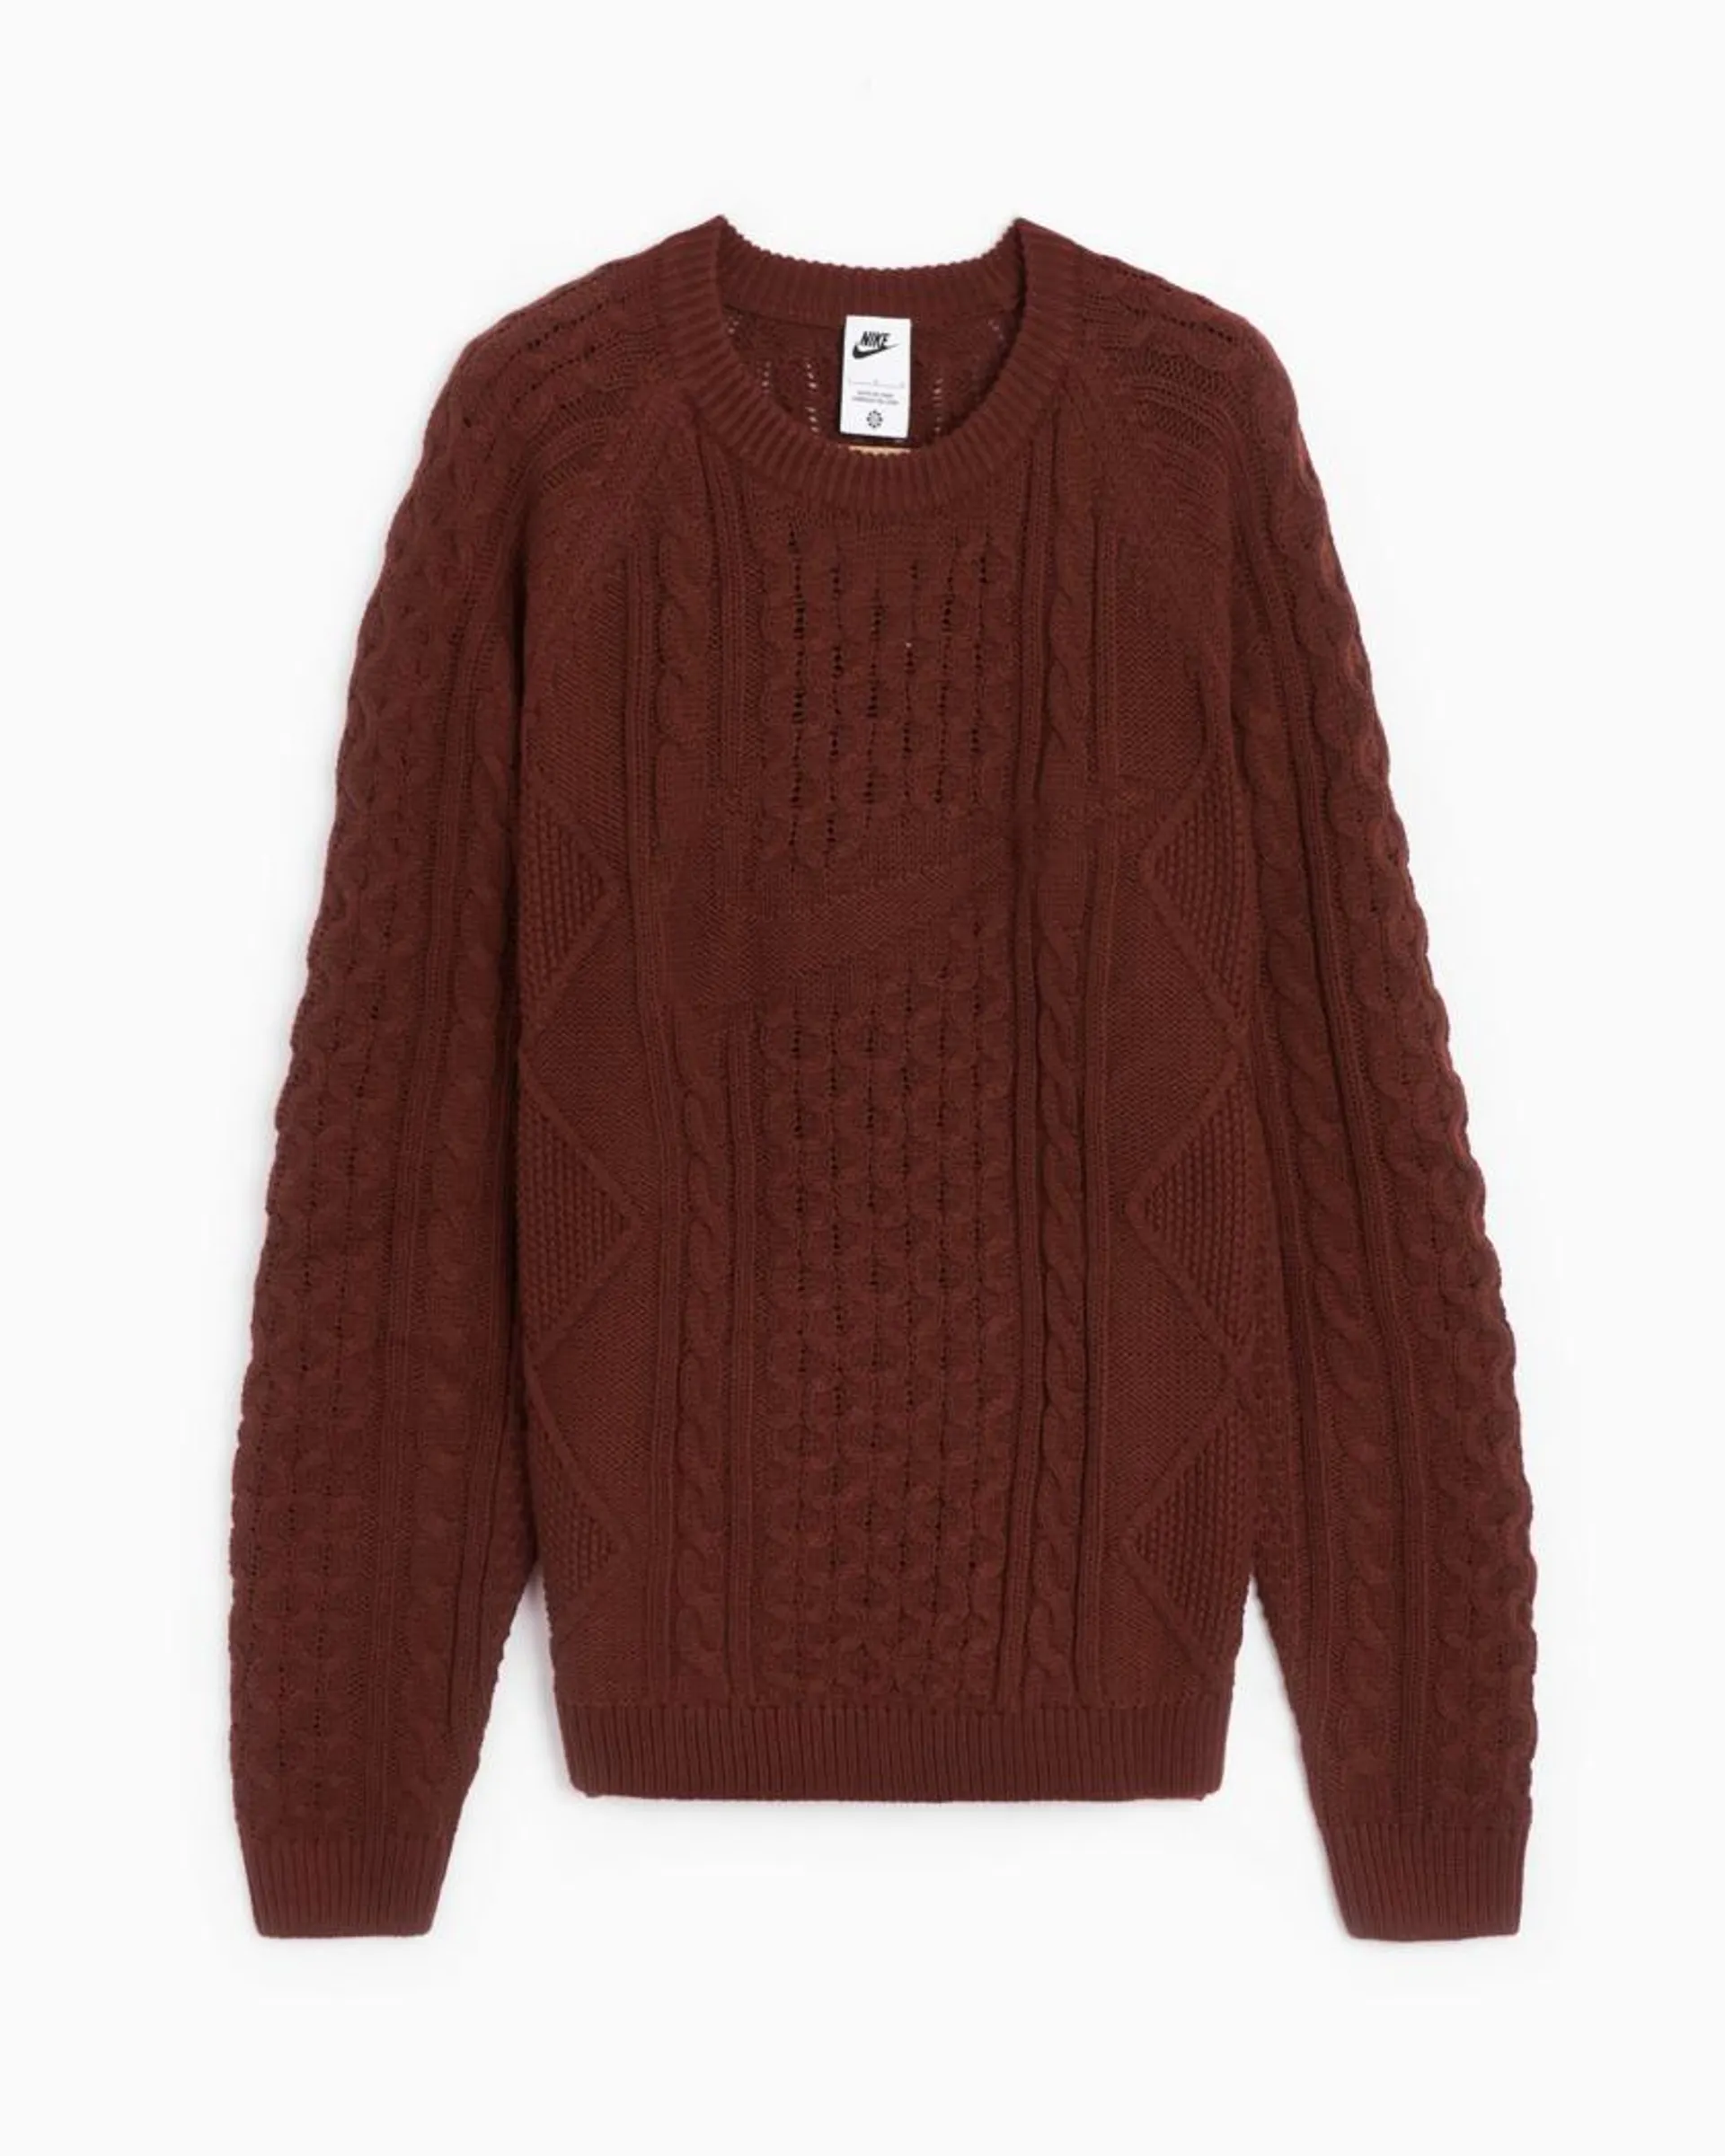 Nike Life Men's Cable Knit Sweater